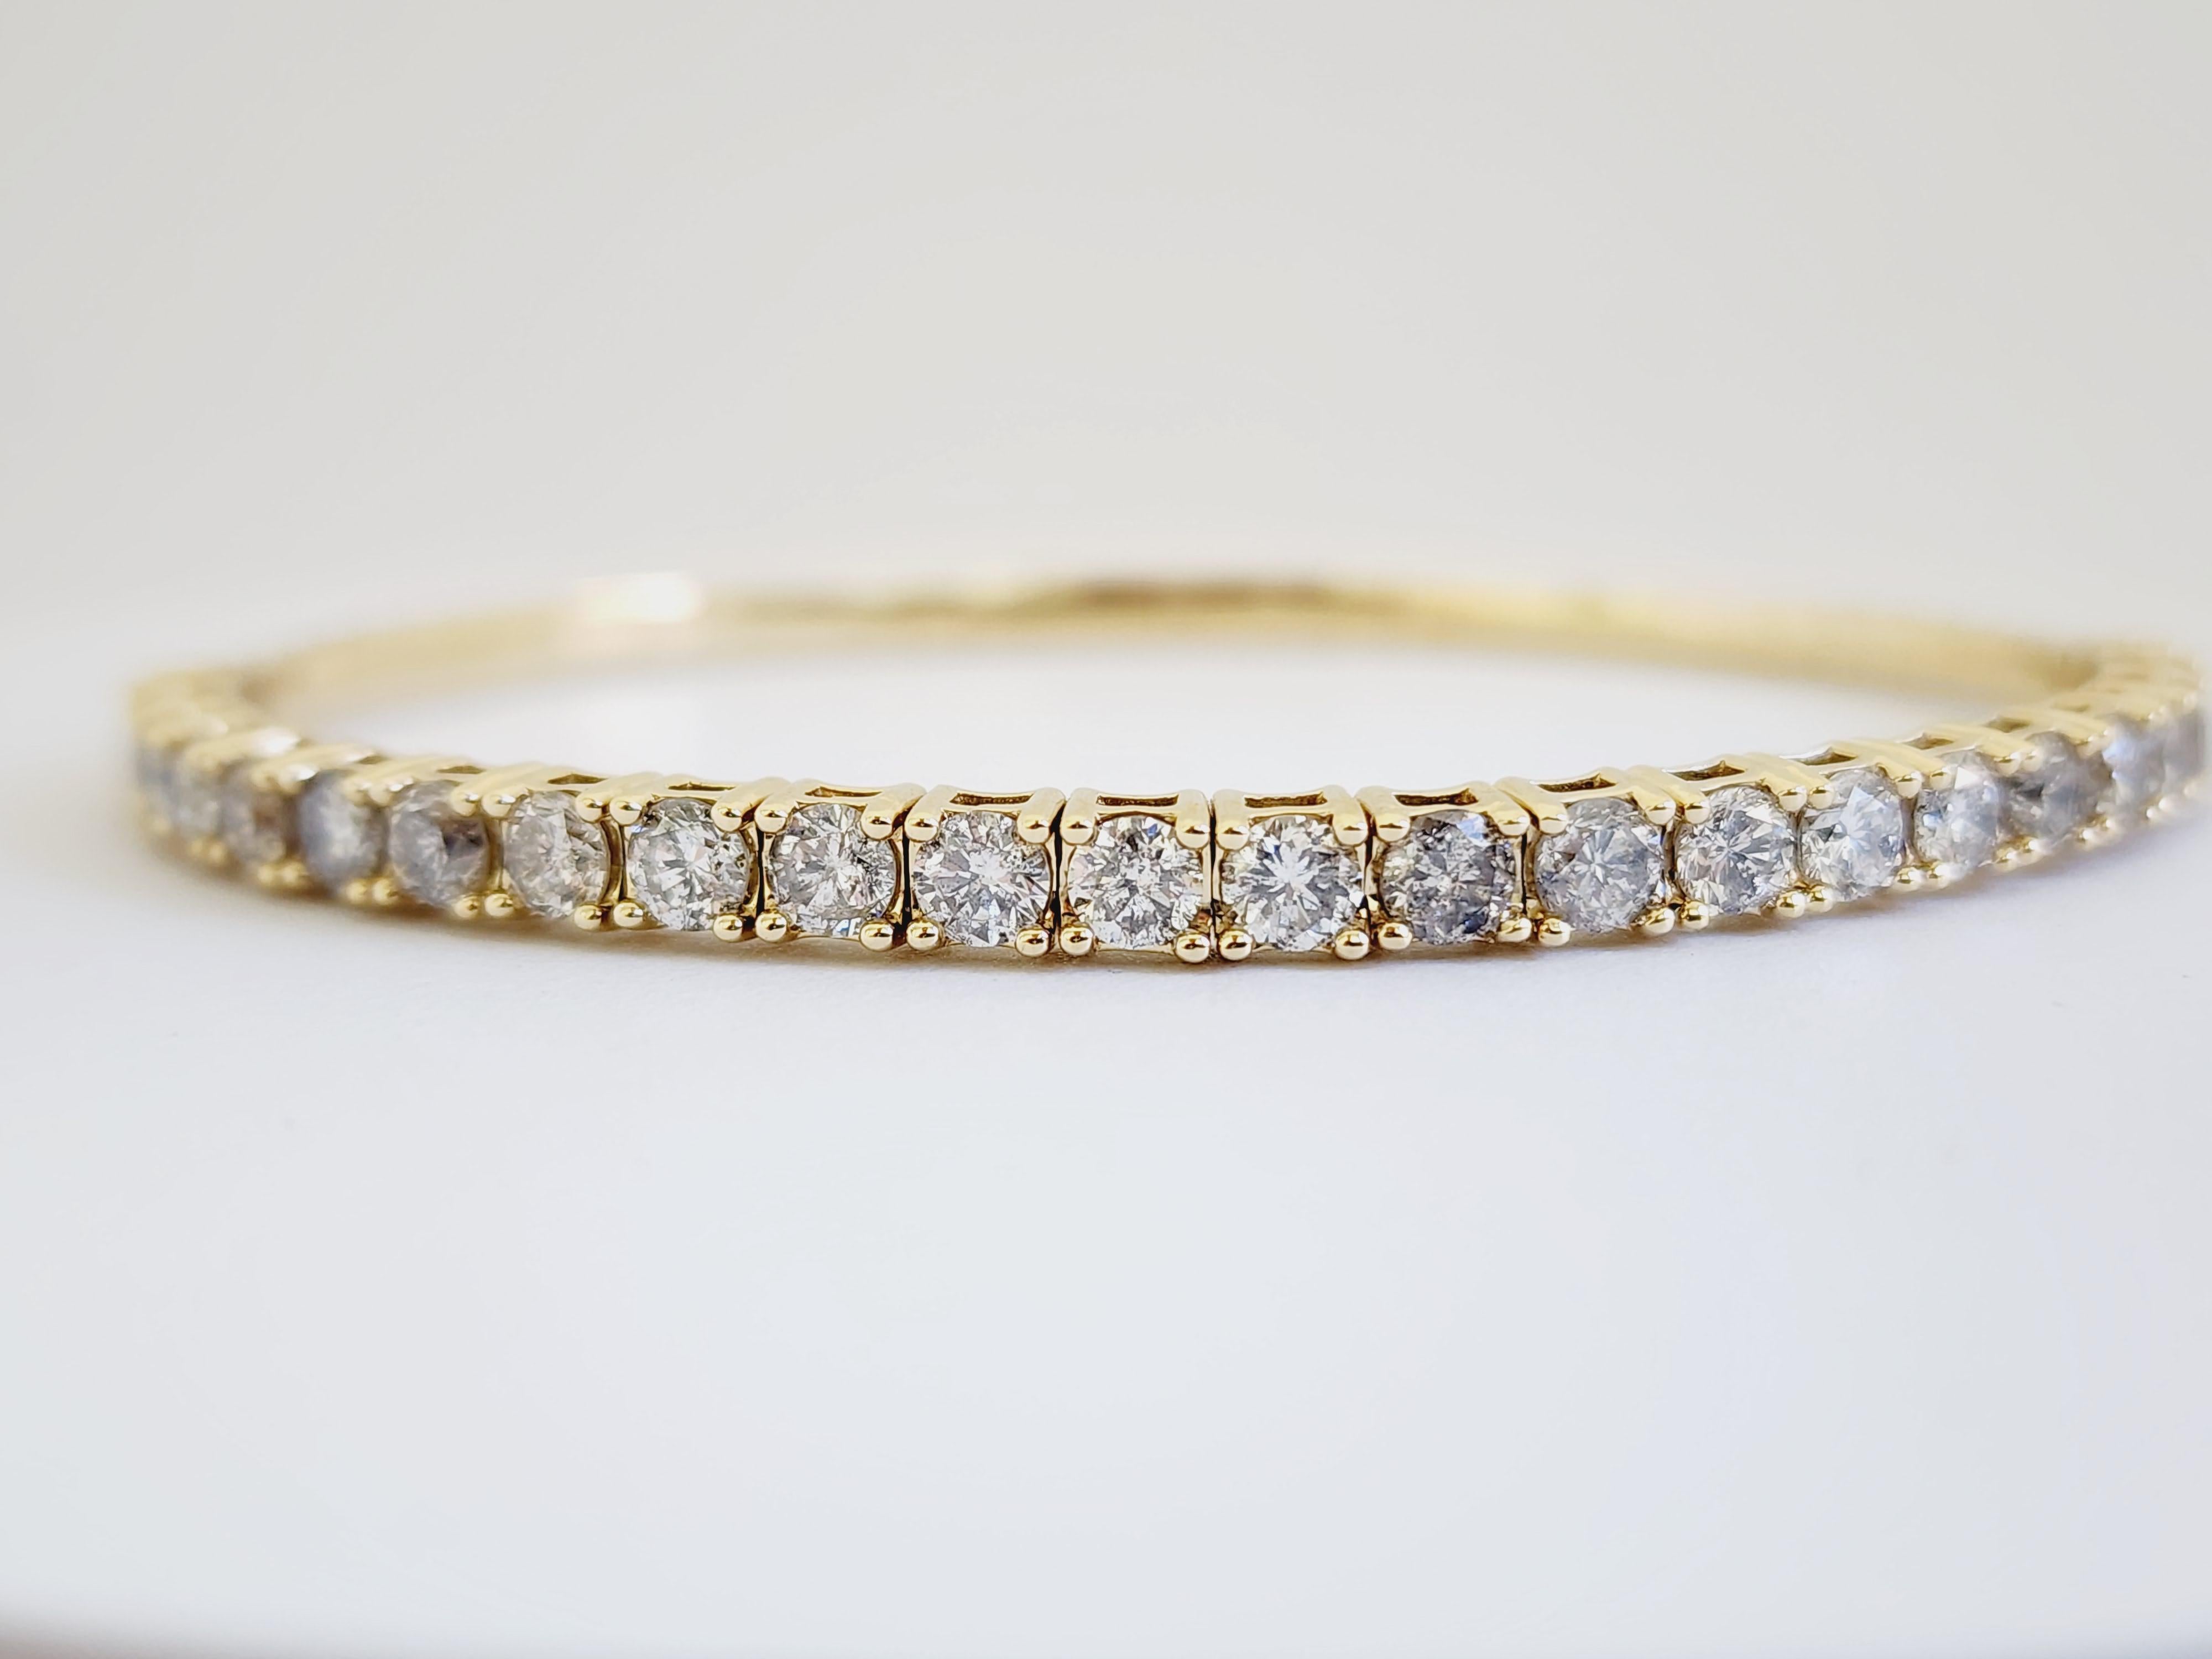 Natural Diamonds 3.75 ctw flexible halfway around bangle yellow gold 14k.
Average Color G, Clarity I, 3.80 mm wide. 7 Inch. 